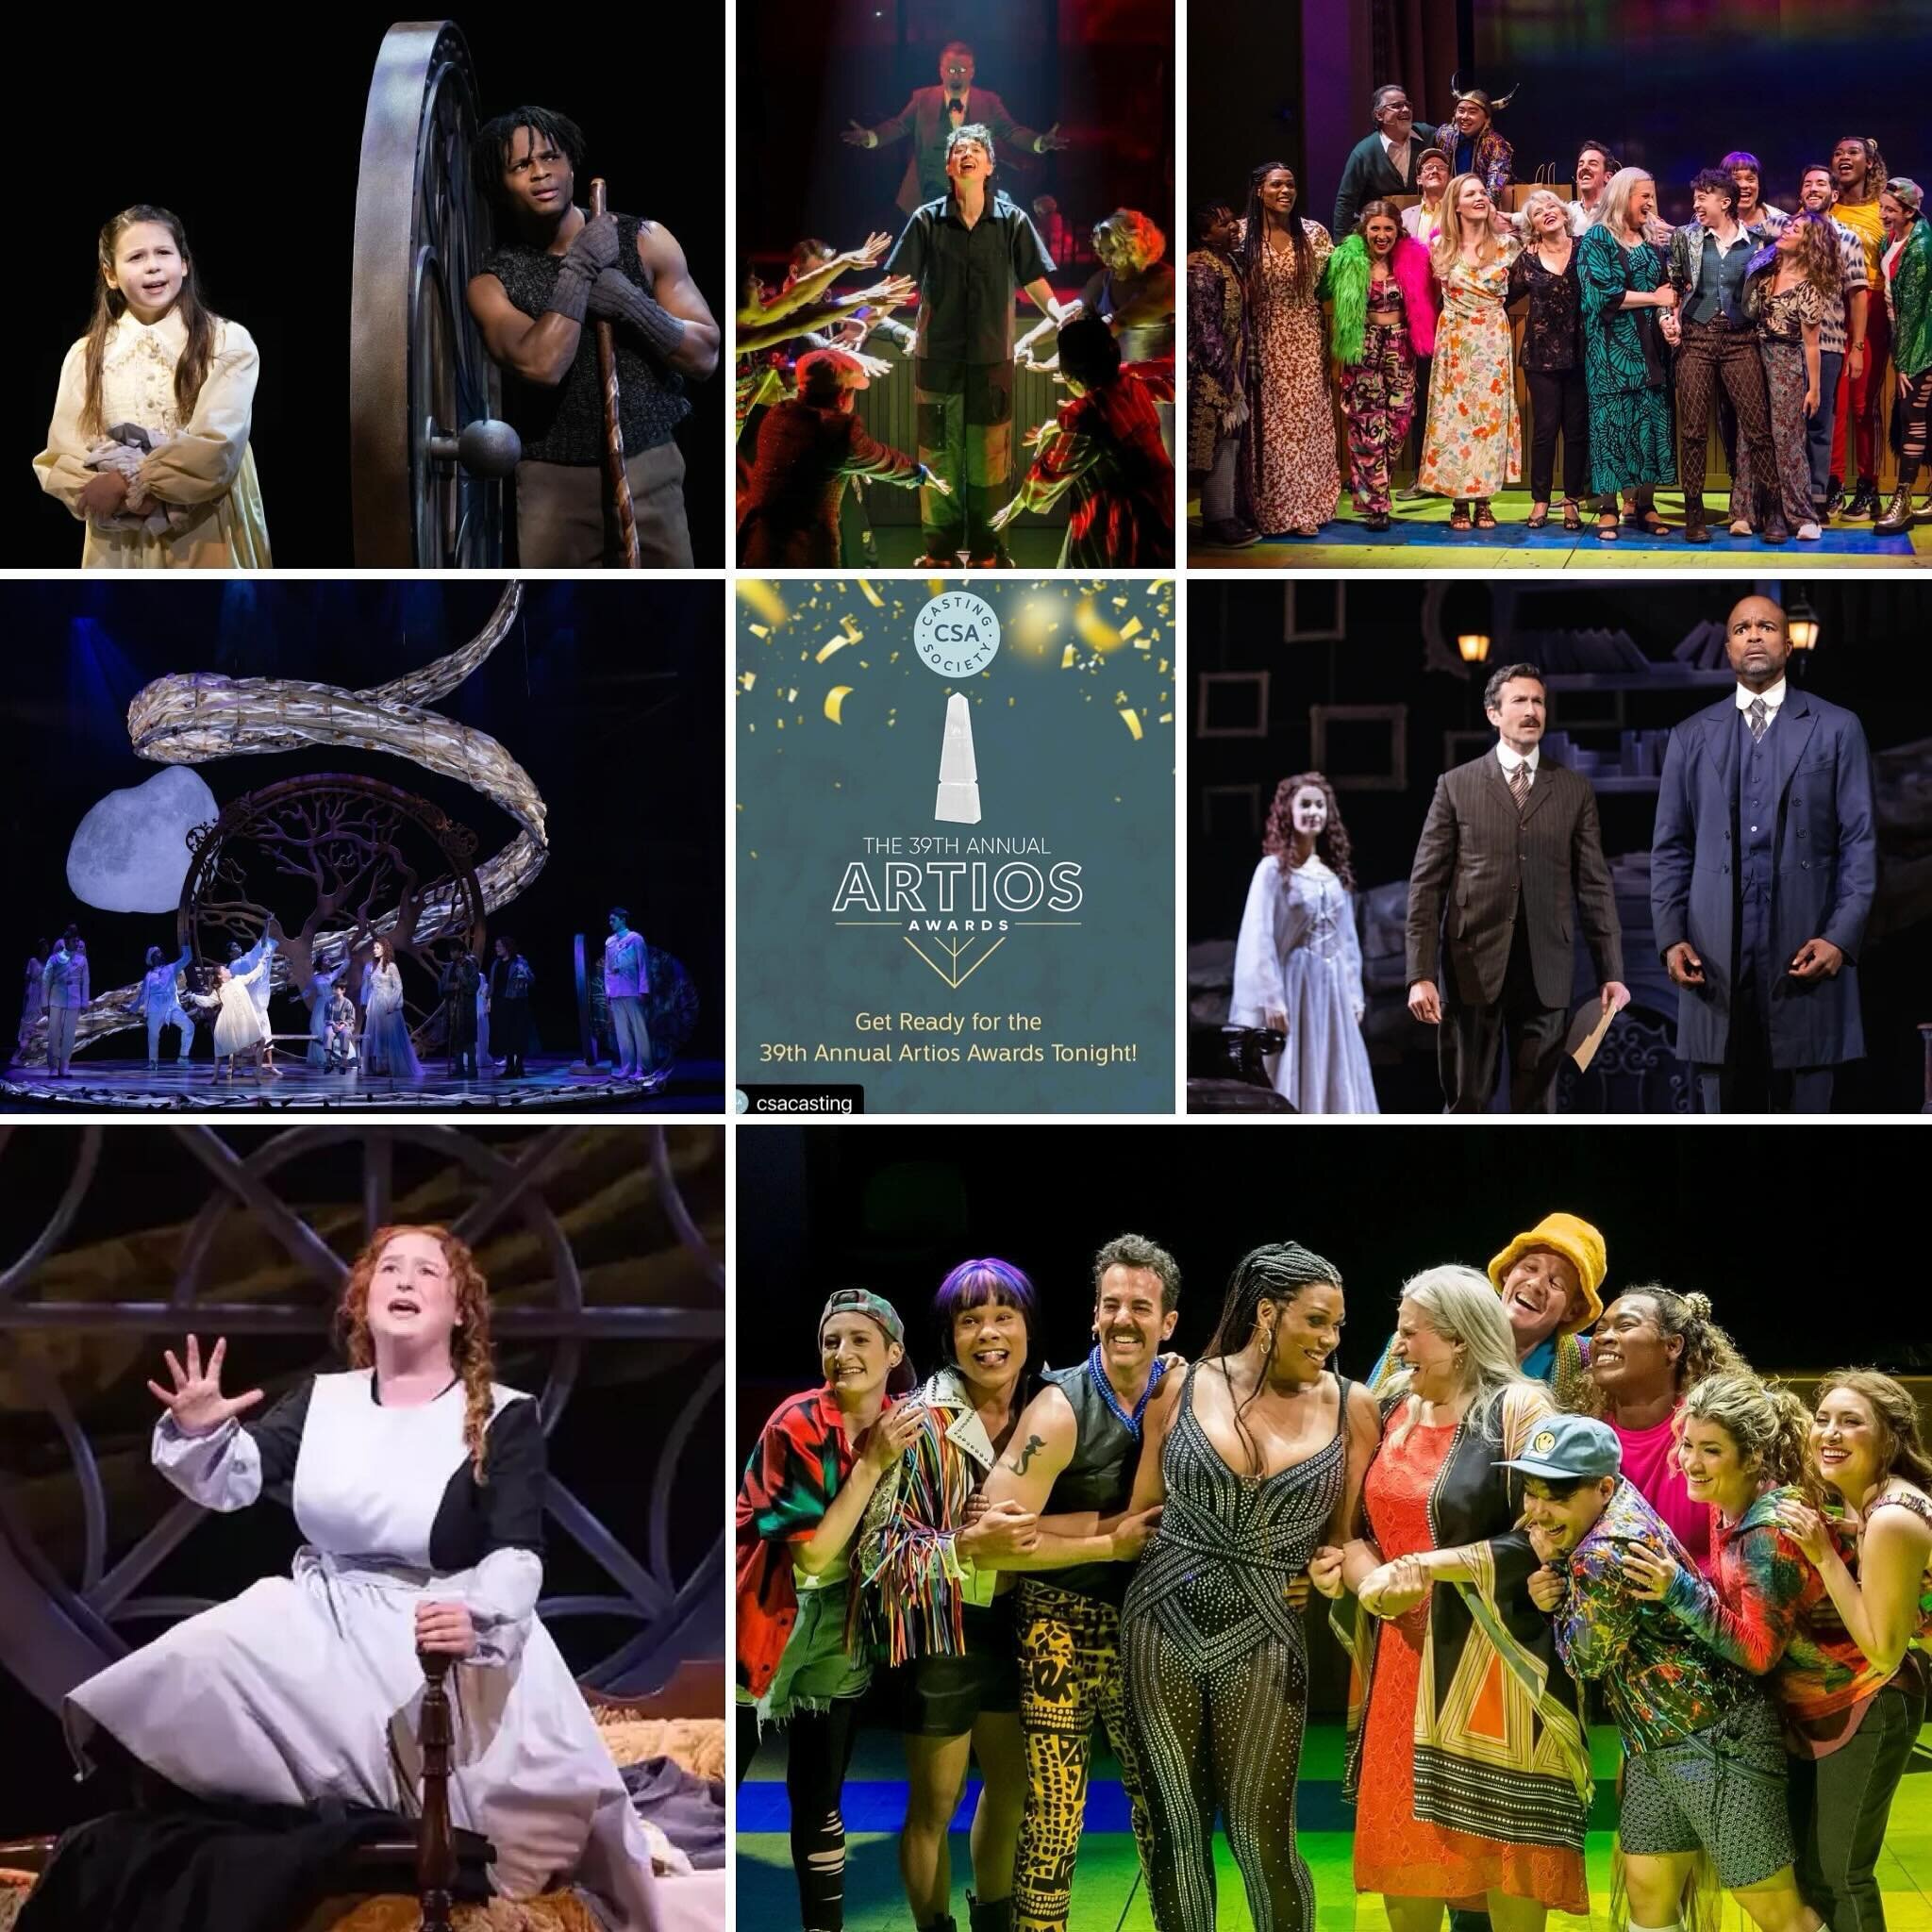 Tonight is the night! The 39th Annual Artios Awards presented by the Casting Society of America! We&rsquo;re so thrilled and honored to be nominated for TWO projects in the category of Los Angeles Theatre, THE SECRET GARDEN at the Ahmanson Theatre an